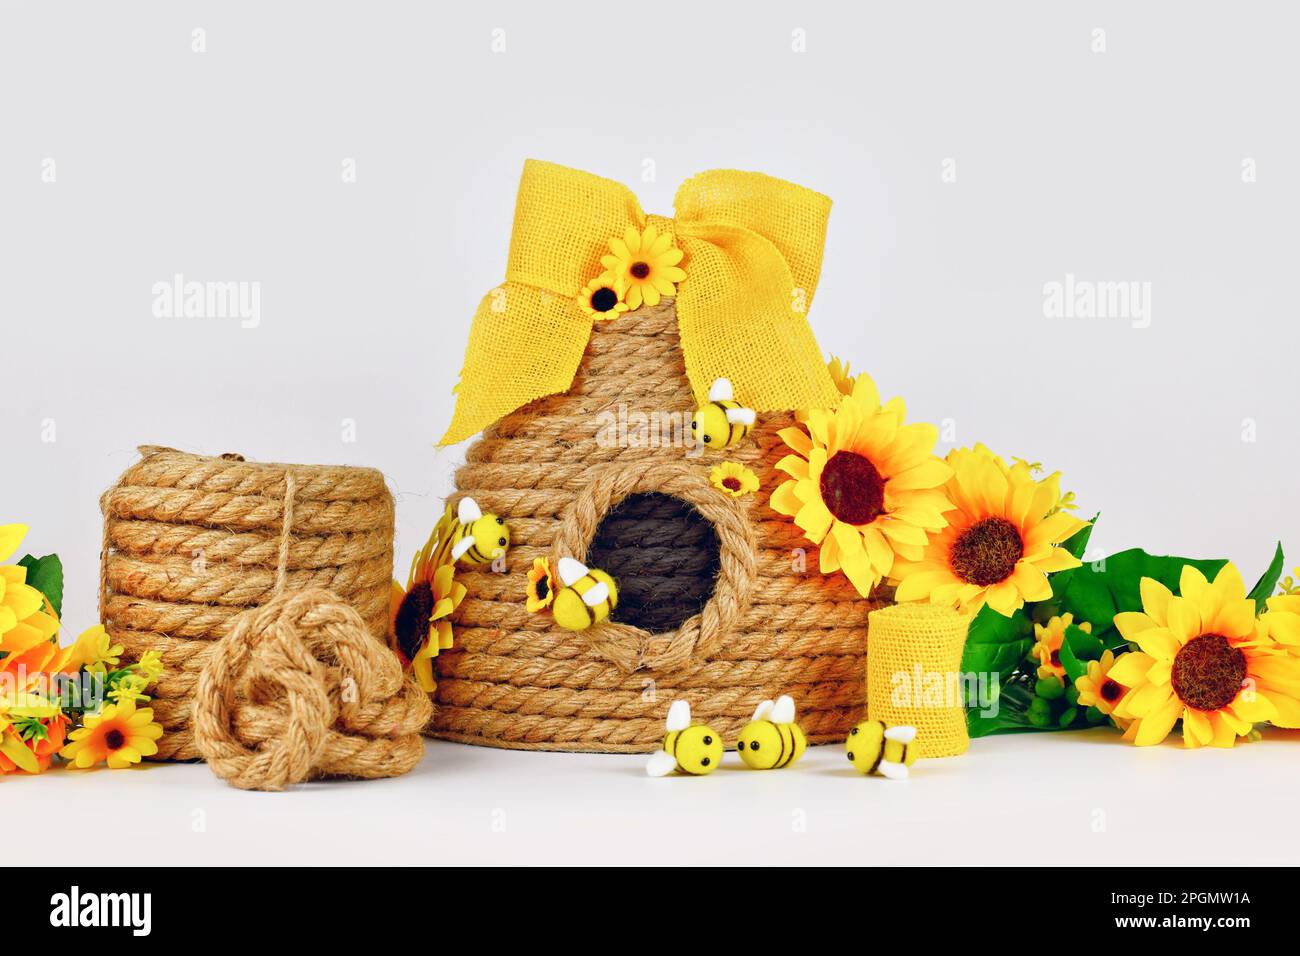 https://c8.alamy.com/comp/2PGMW1A/diy-rope-beehive-decoration-with-materials-like-fake-flowers-jute-rope-and-felt-bees-2PGMW1A.jpg